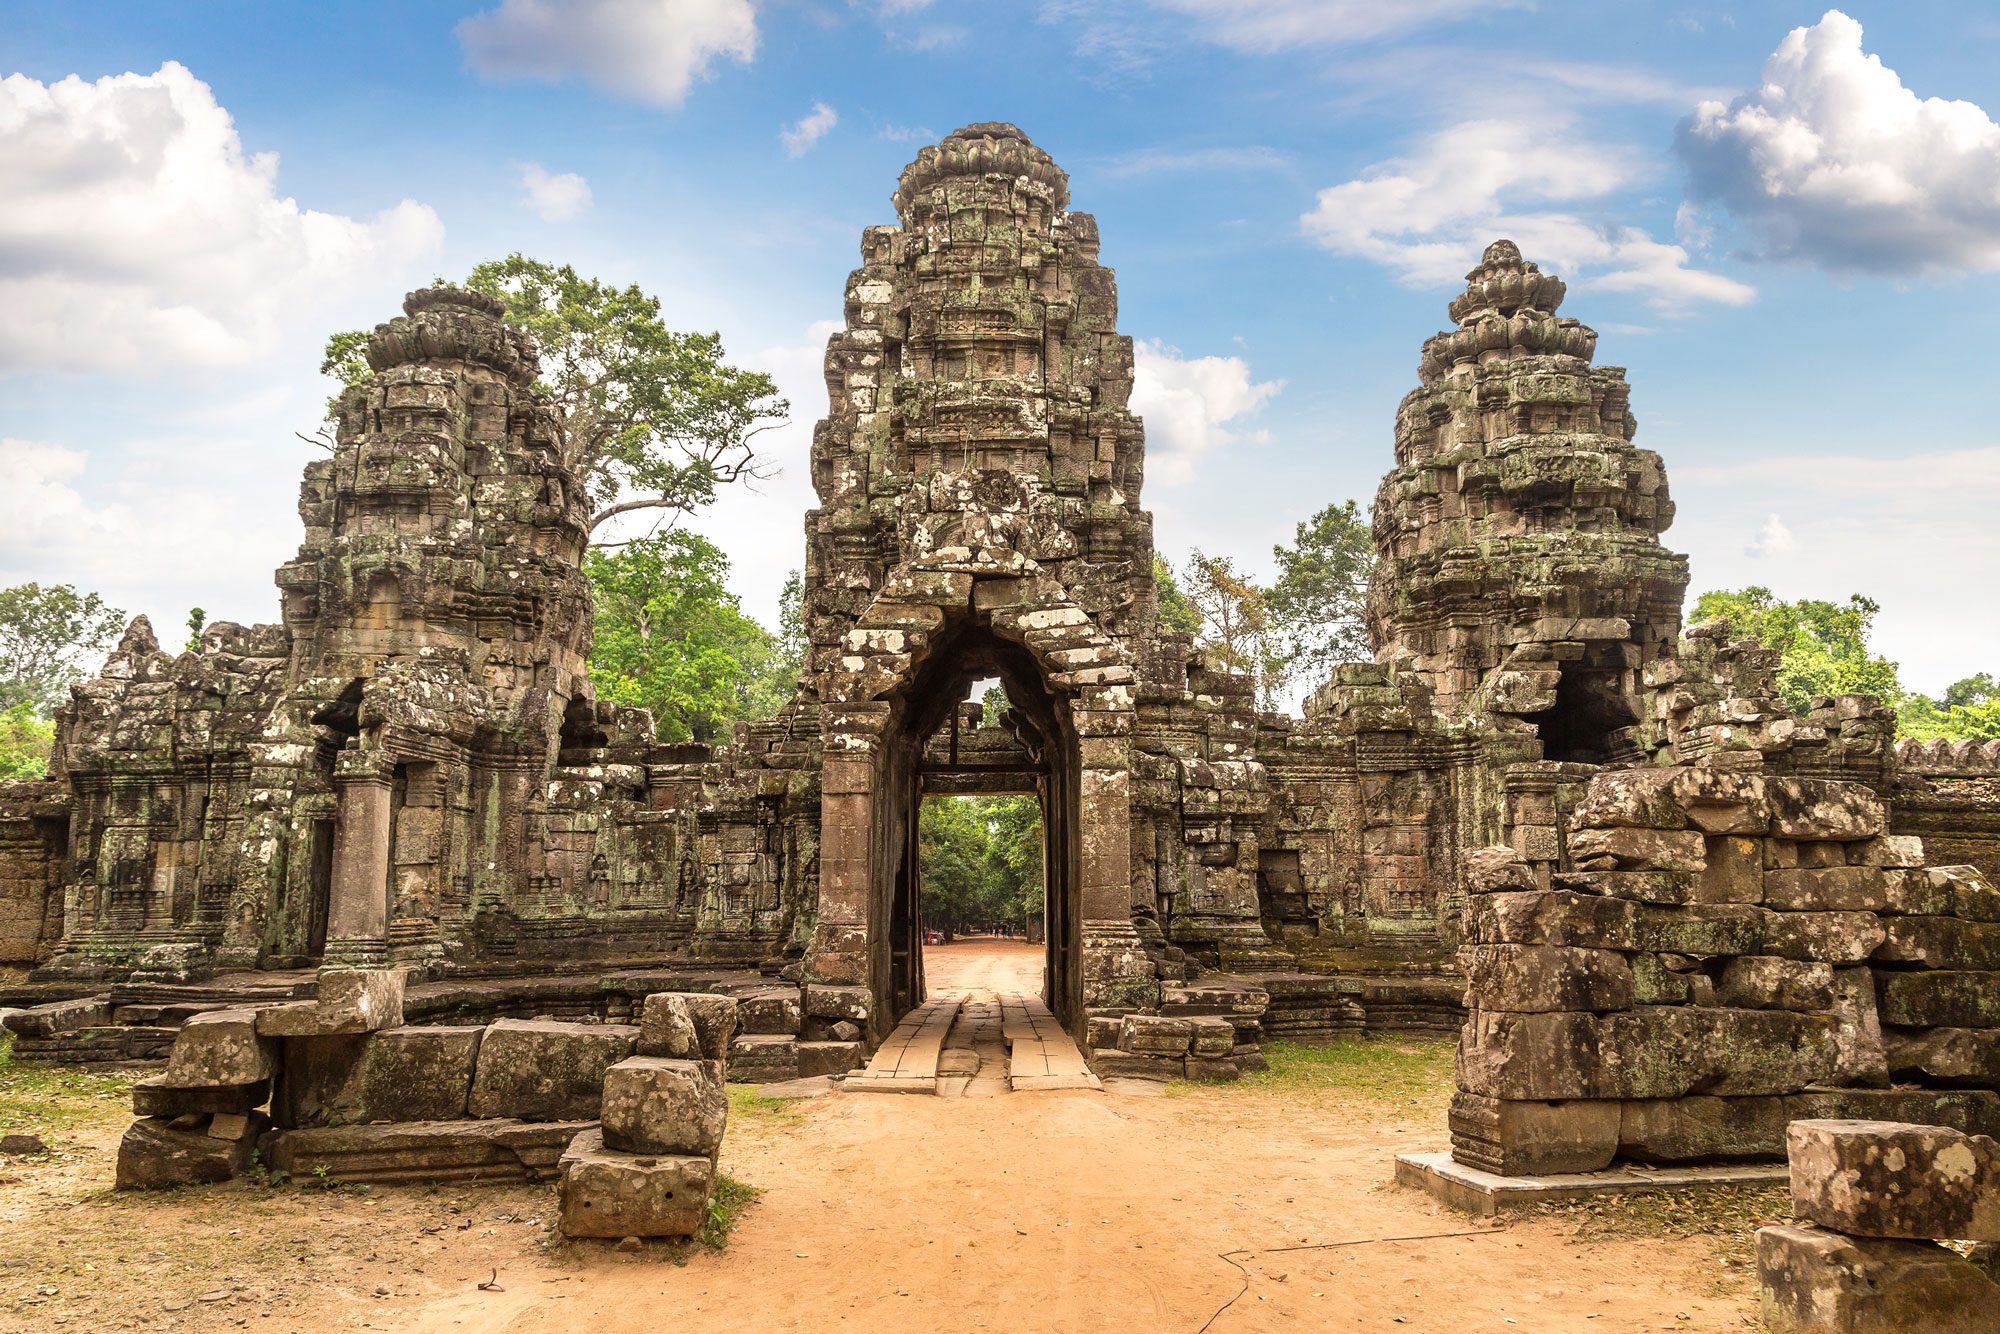 <p class=""><strong>Why you should go:</strong> More ways to explore and two new airports to reach the country</p> <p>Cambodia is a <a href="https://www.rd.com/list/bucket-list-adventures/" rel="noopener noreferrer">bucket-list destination</a> for many travelers. "With the addition of luxury lodges and resorts, travelers can now enjoy a true luxury immersion in Cambodia—blending ancient ruins and culture, cuisine and handicrafts, rainforest and jungle, and ending with a sublime beach stay," says Brady Binstadt, CEO of GeoEx, an adventure-travel company. In the little-visited Cardamom Forest Protected Area, options for hiking, mountain biking, boating and bird-watching abound, says Binstadt, who also recommends boating through lush forest to Tatai village, where visitors can walk by the river, kayak through mangroves and listen to the symphonic sounds of wildlife from a floating lodge.</p> <p>You'll also want to visit Angkor Wat, famed for its glorious temples. Happily, reaching Angkor Wat just became a lot easier with the brand-new, $1 billion Siem Reap-Angkor International Airport, which is just a short drive from the UNESCO Heritage Site temple complex. Later in 2024, the capitol of Cambodia, Phnom Penh, will also unveil a new $1.5 billion airport, providing even more ways to reach the country.</p> <p><strong>Where to stay: </strong><a href="https://www.tripadvisor.com/Hotel_Review-g16701391-d15791874-Reviews-Shinta_Mani_Wild_Bensley_Collection-Ou_Bak_Roteh_Sihanoukville_Province.html" rel="noopener noreferrer">Shinta Mani Wild</a> in the Cardamom Mountains is a luxury jungle retreat about three hours from Phnom Penh; it boasts its own zipline over the waterfalls and river where the remote lodge is located. Another unique option is <a href="https://www.tripadvisor.com/Hotel_Review-g325573-d14058124-Reviews-Six_Senses_Krabey_Island-Sihanoukville_Sihanoukville_Province.html" rel="noopener noreferrer">Six Senses Krabey Island</a> off the southern coast, where 40 glass-front villas are tucked into the dense foliage of this romantic resort. Indulge in a treatment at the luxe spa after exploring the nearby Kbal Chhay waterfalls and the waterways of Ream National Park.</p> <p class="listicle-page__cta-button-shop"><a class="shop-btn" href="https://www.tripadvisor.com/Hotel_Review-g16701391-d15791874-Reviews-Shinta_Mani_Wild_Bensley_Collection-Ou_Bak_Roteh_Sihanoukville_Province.html">Book Now</a></p>